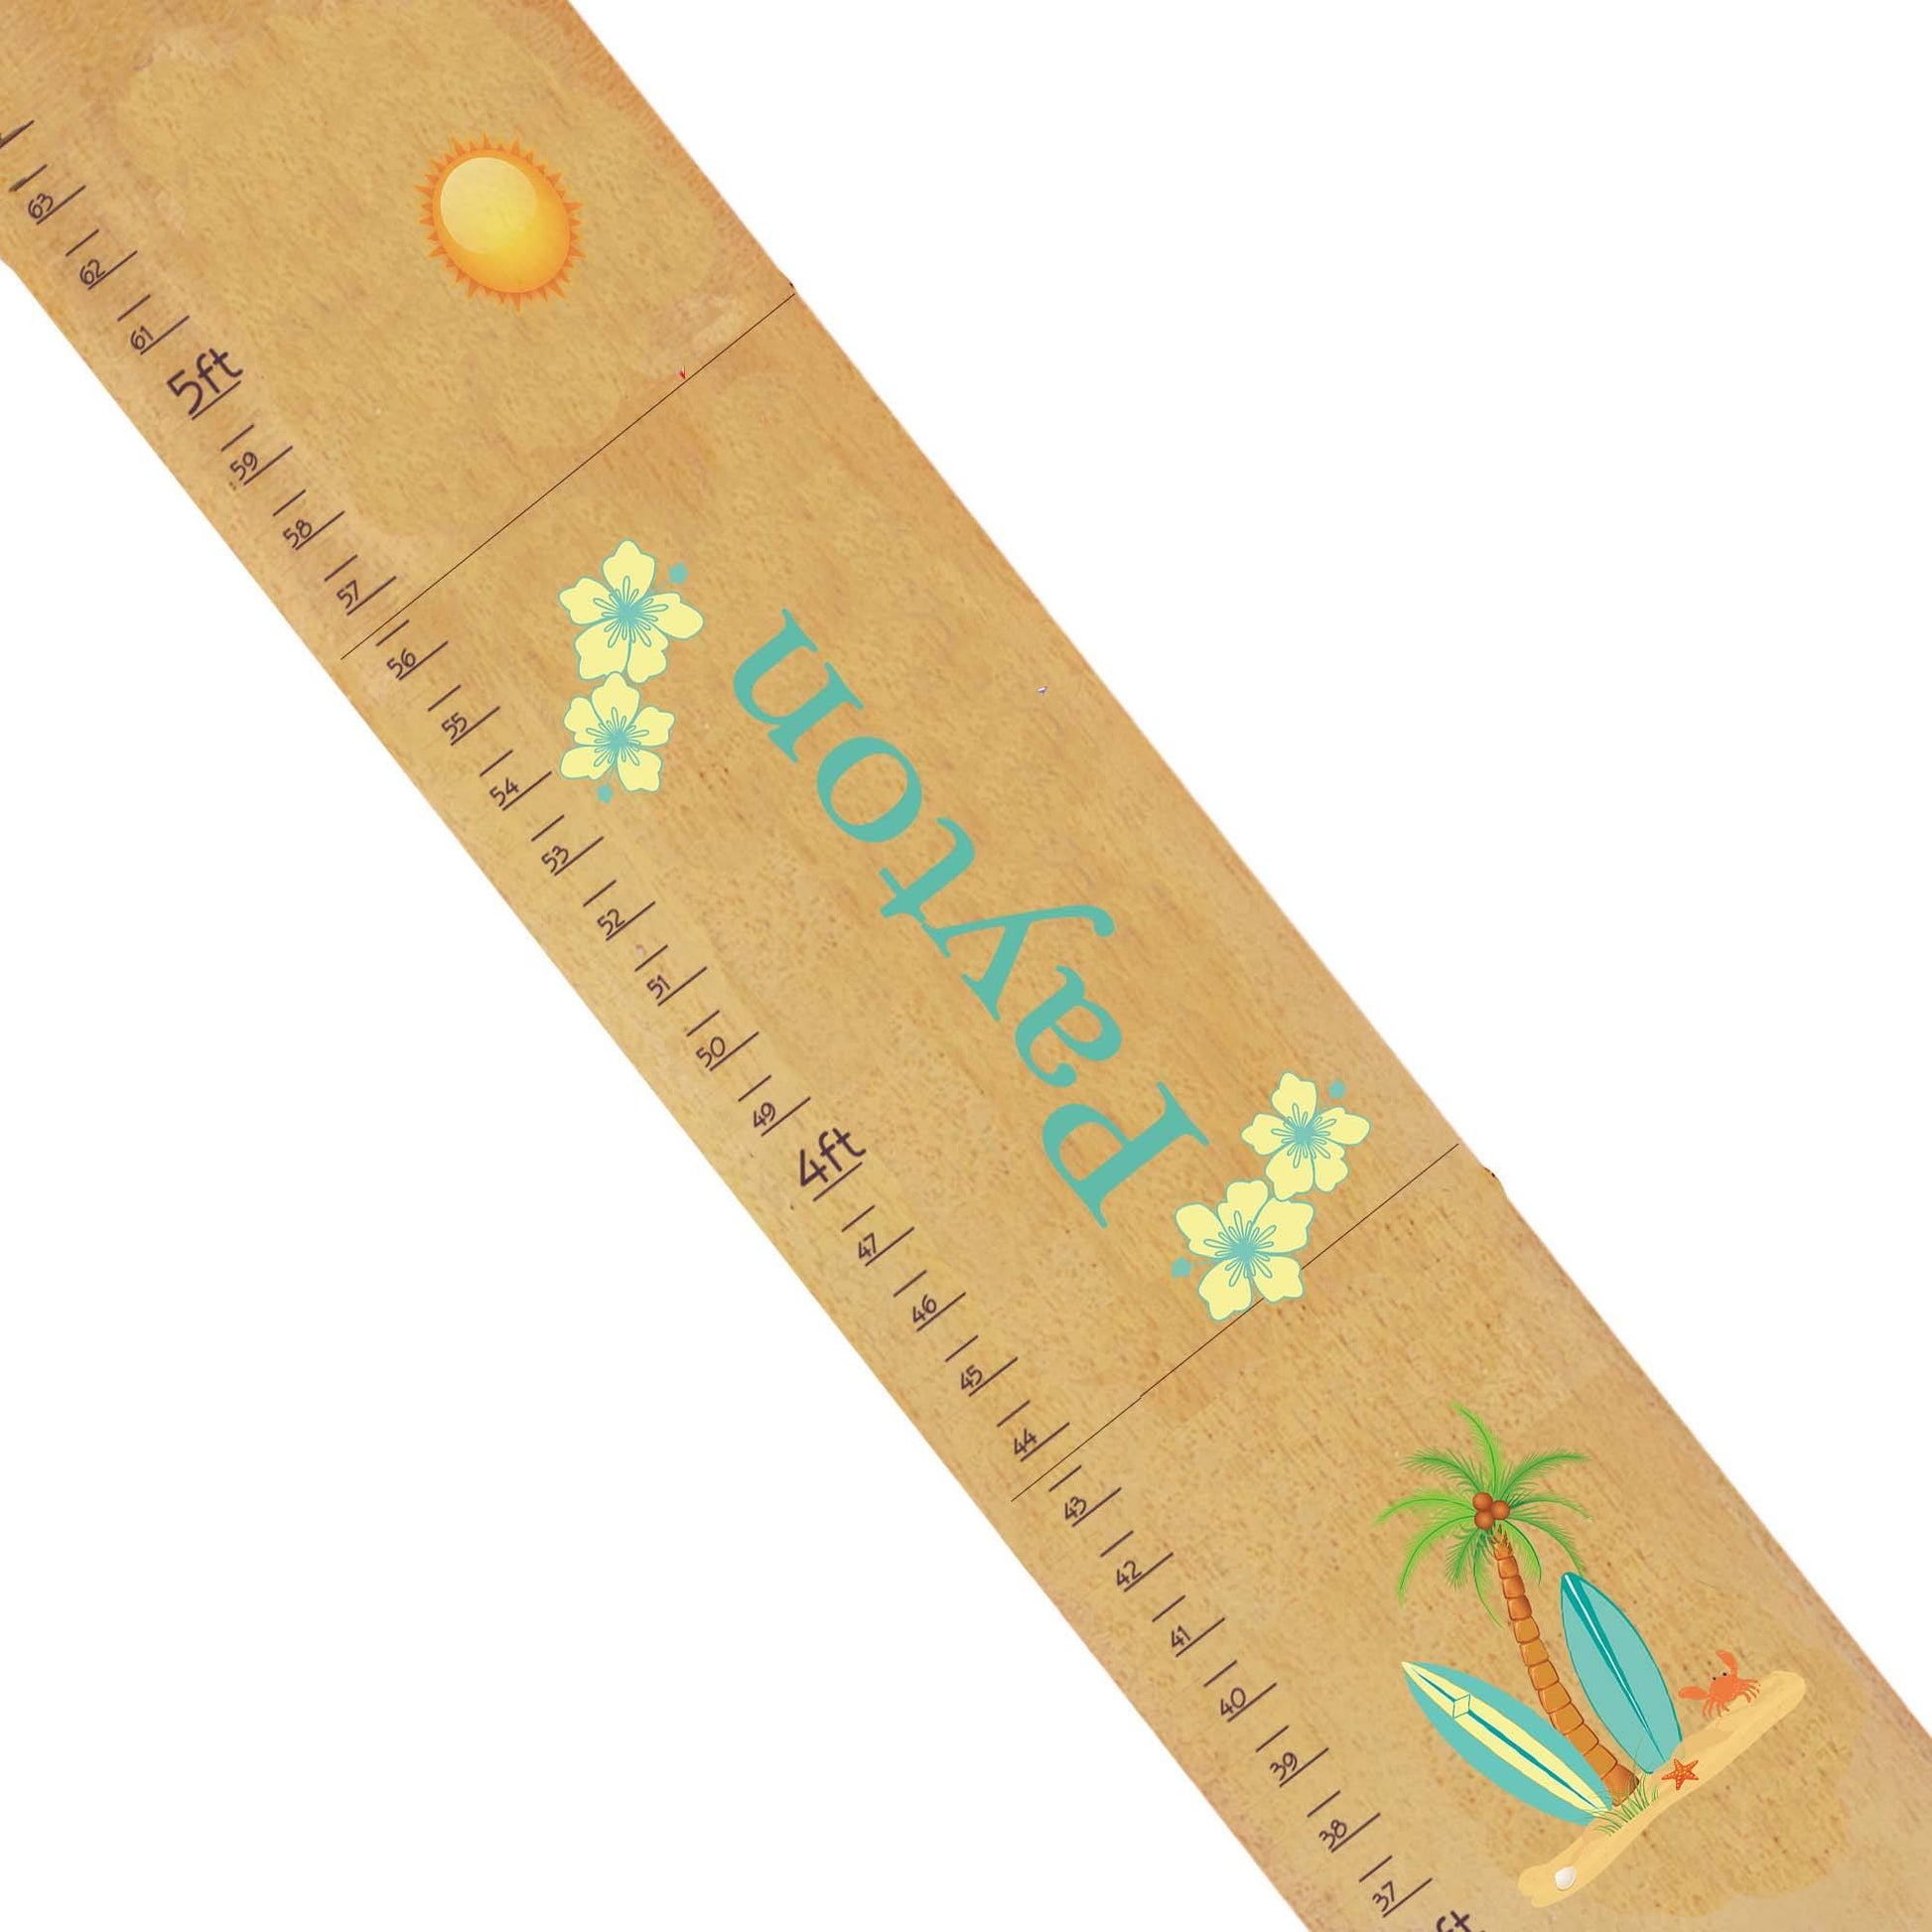 Personalized surfboard Natural Growth Chart